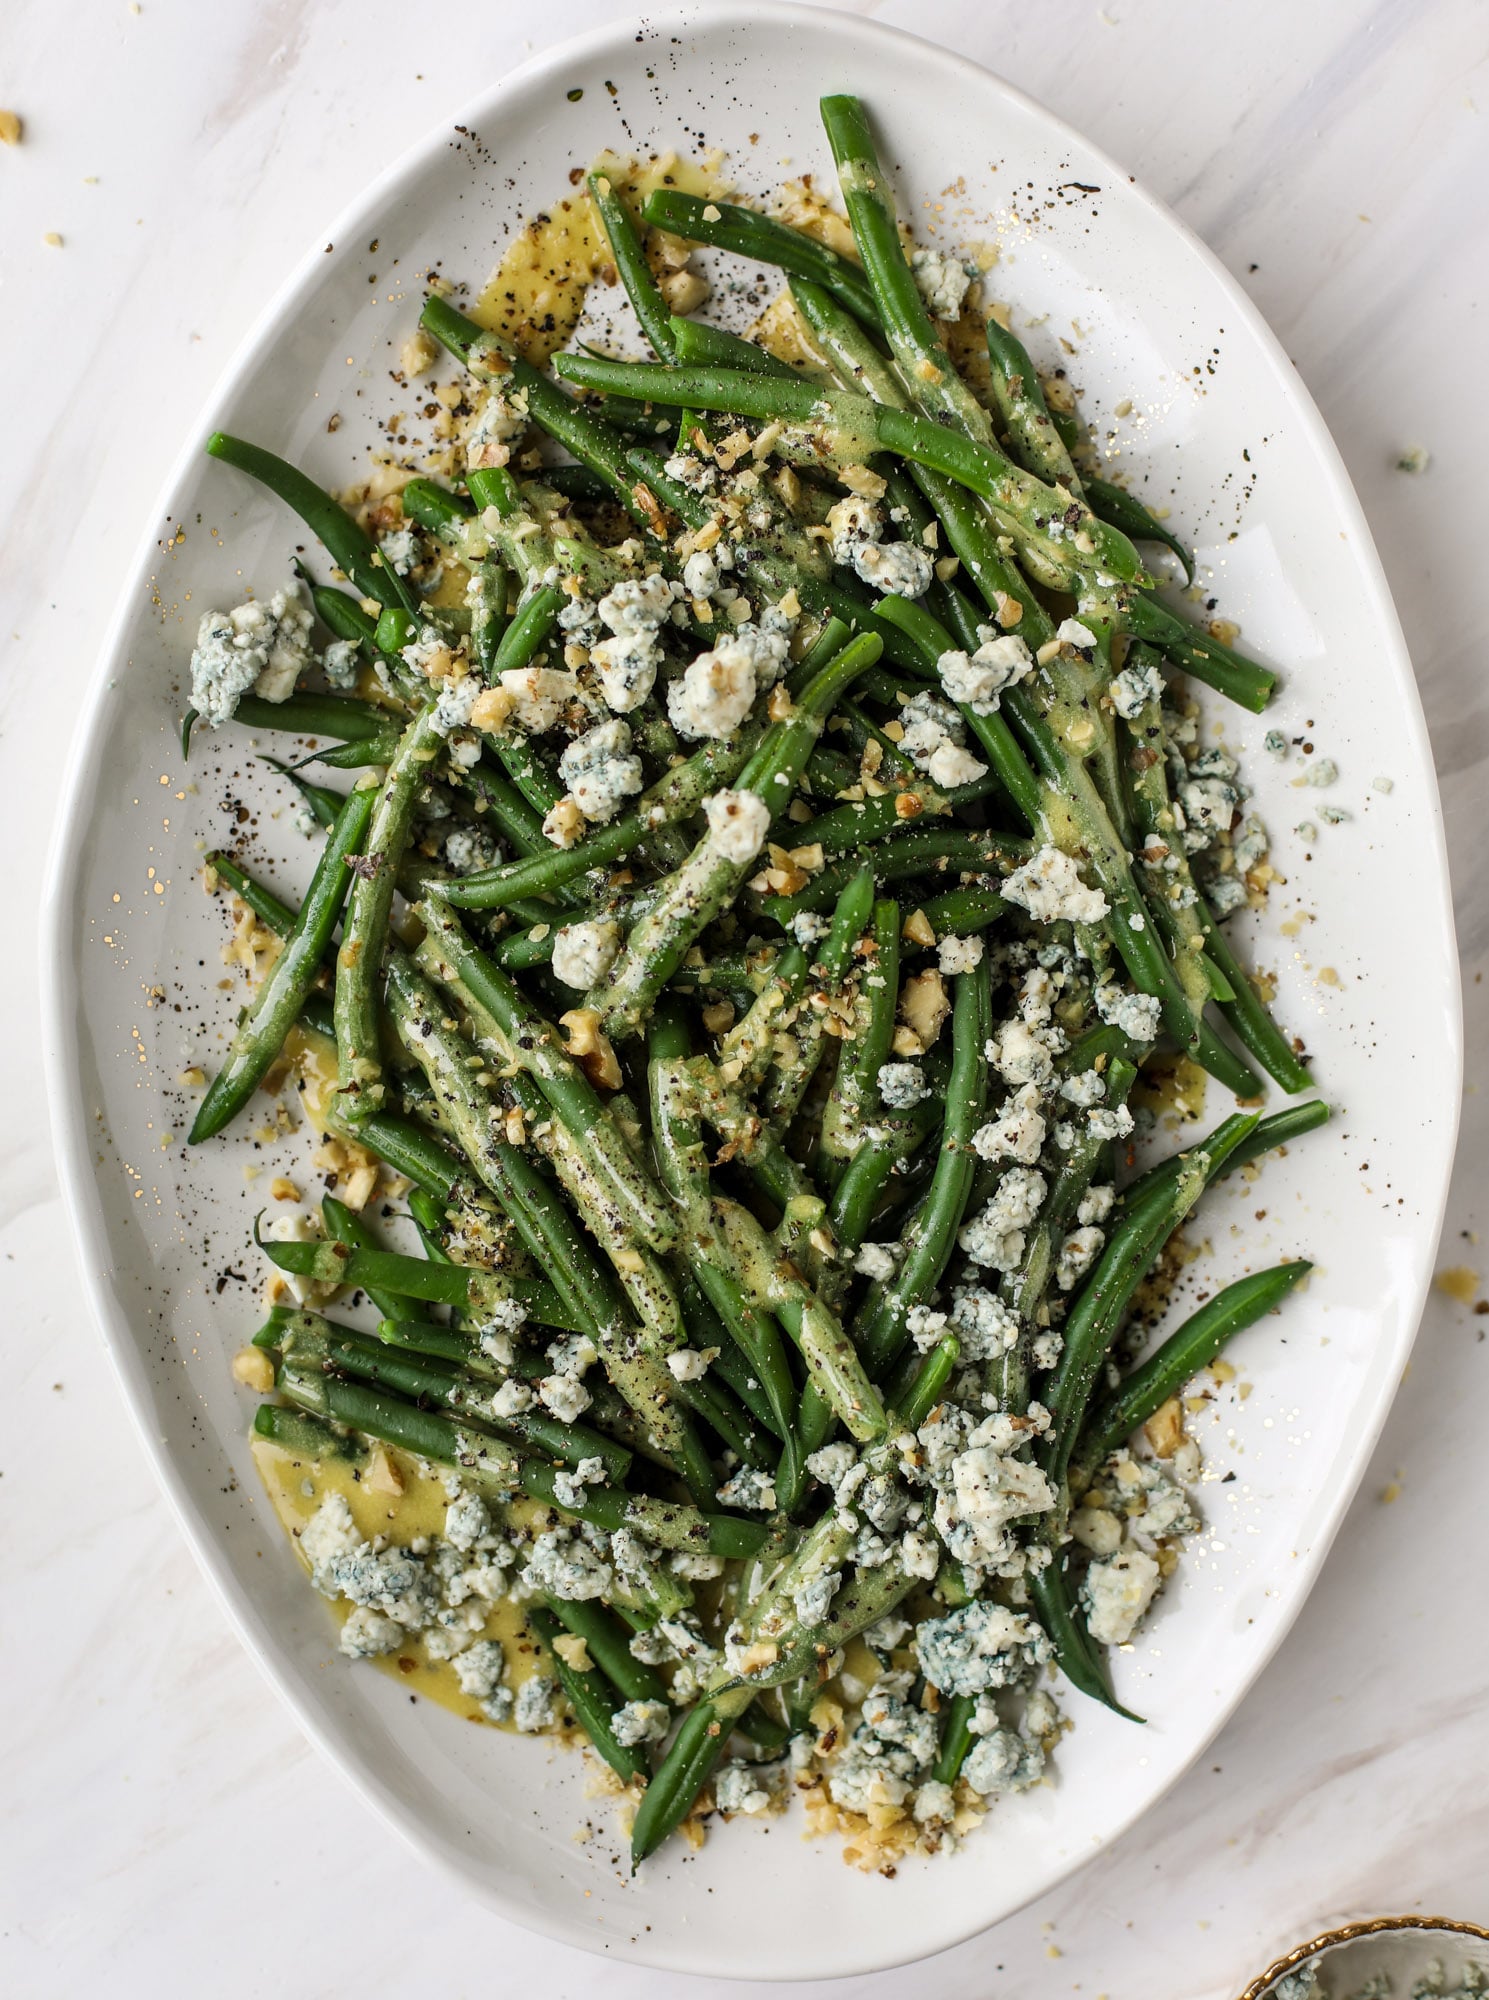 This fresh green bean salad is the ultimate summer side dish. Crisp green beans, creamy blue cheese, chopped walnuts and a dijon dressing. It's beyond!